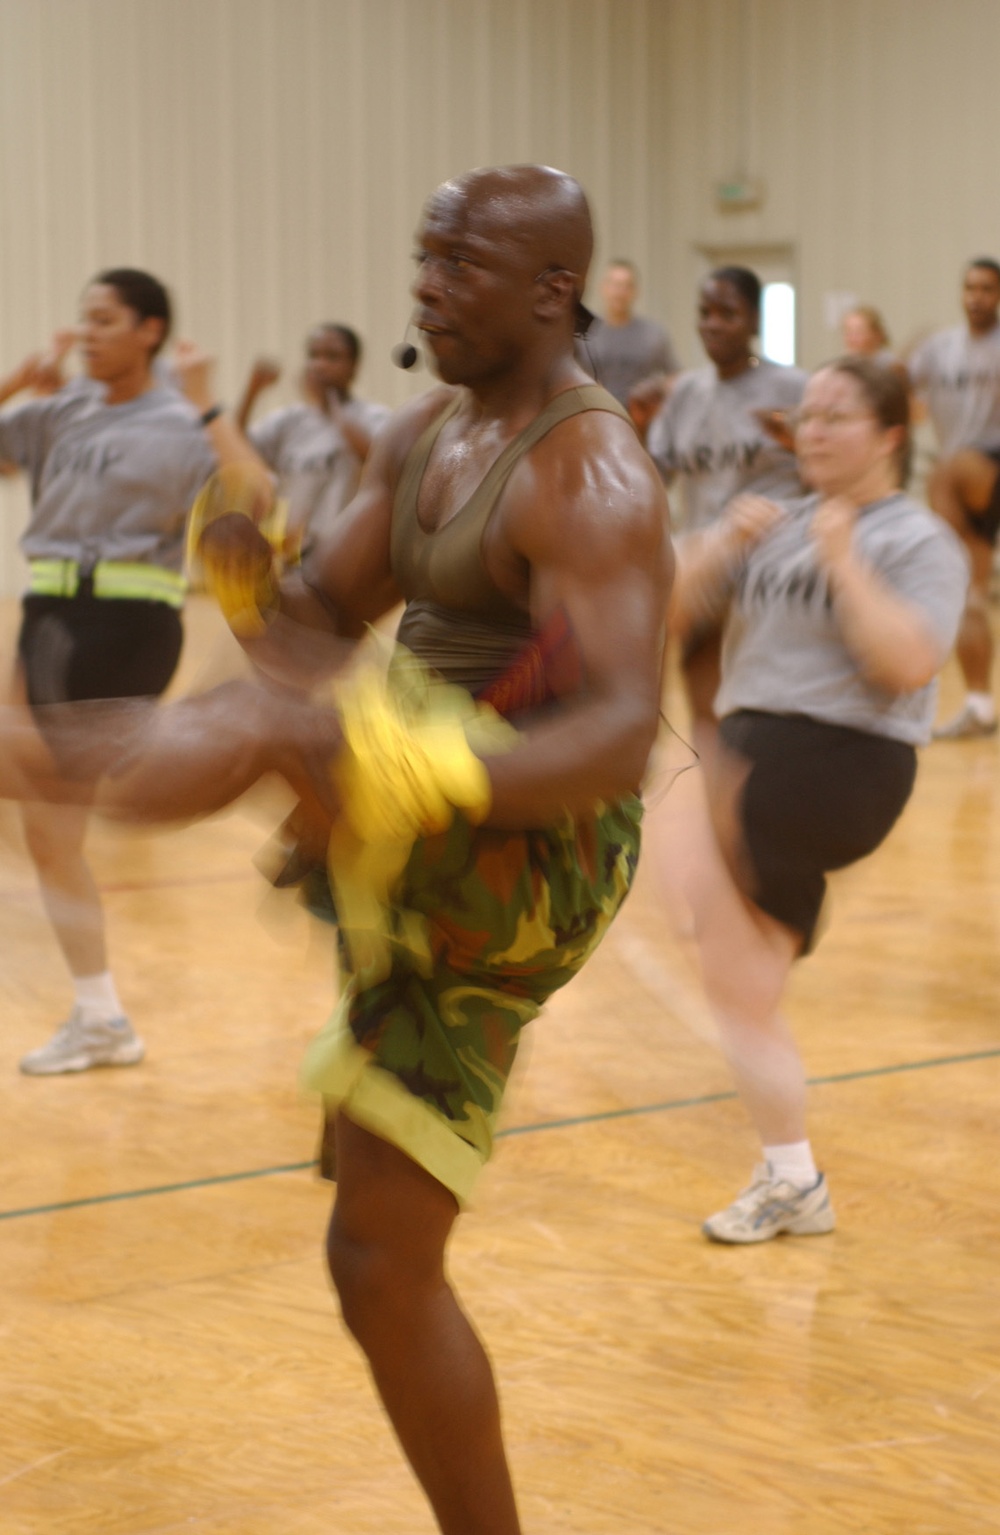 Billy Blanks  Get Your Team Fit Physically, Mentally & Spiritually